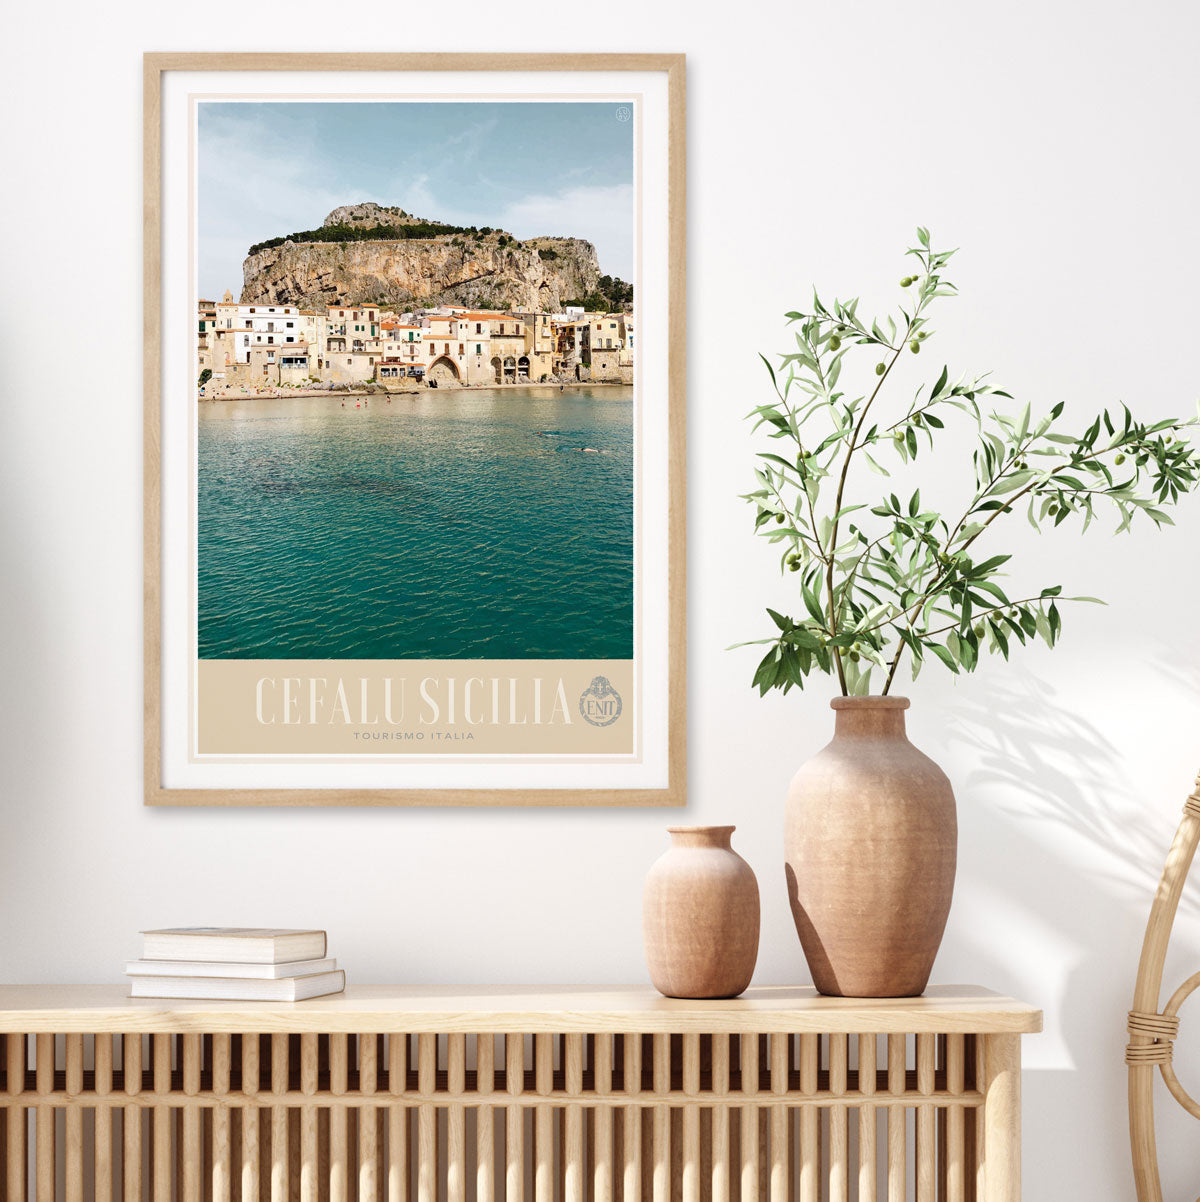 Cefalu Sicily retro vintage poster from Places We Luv